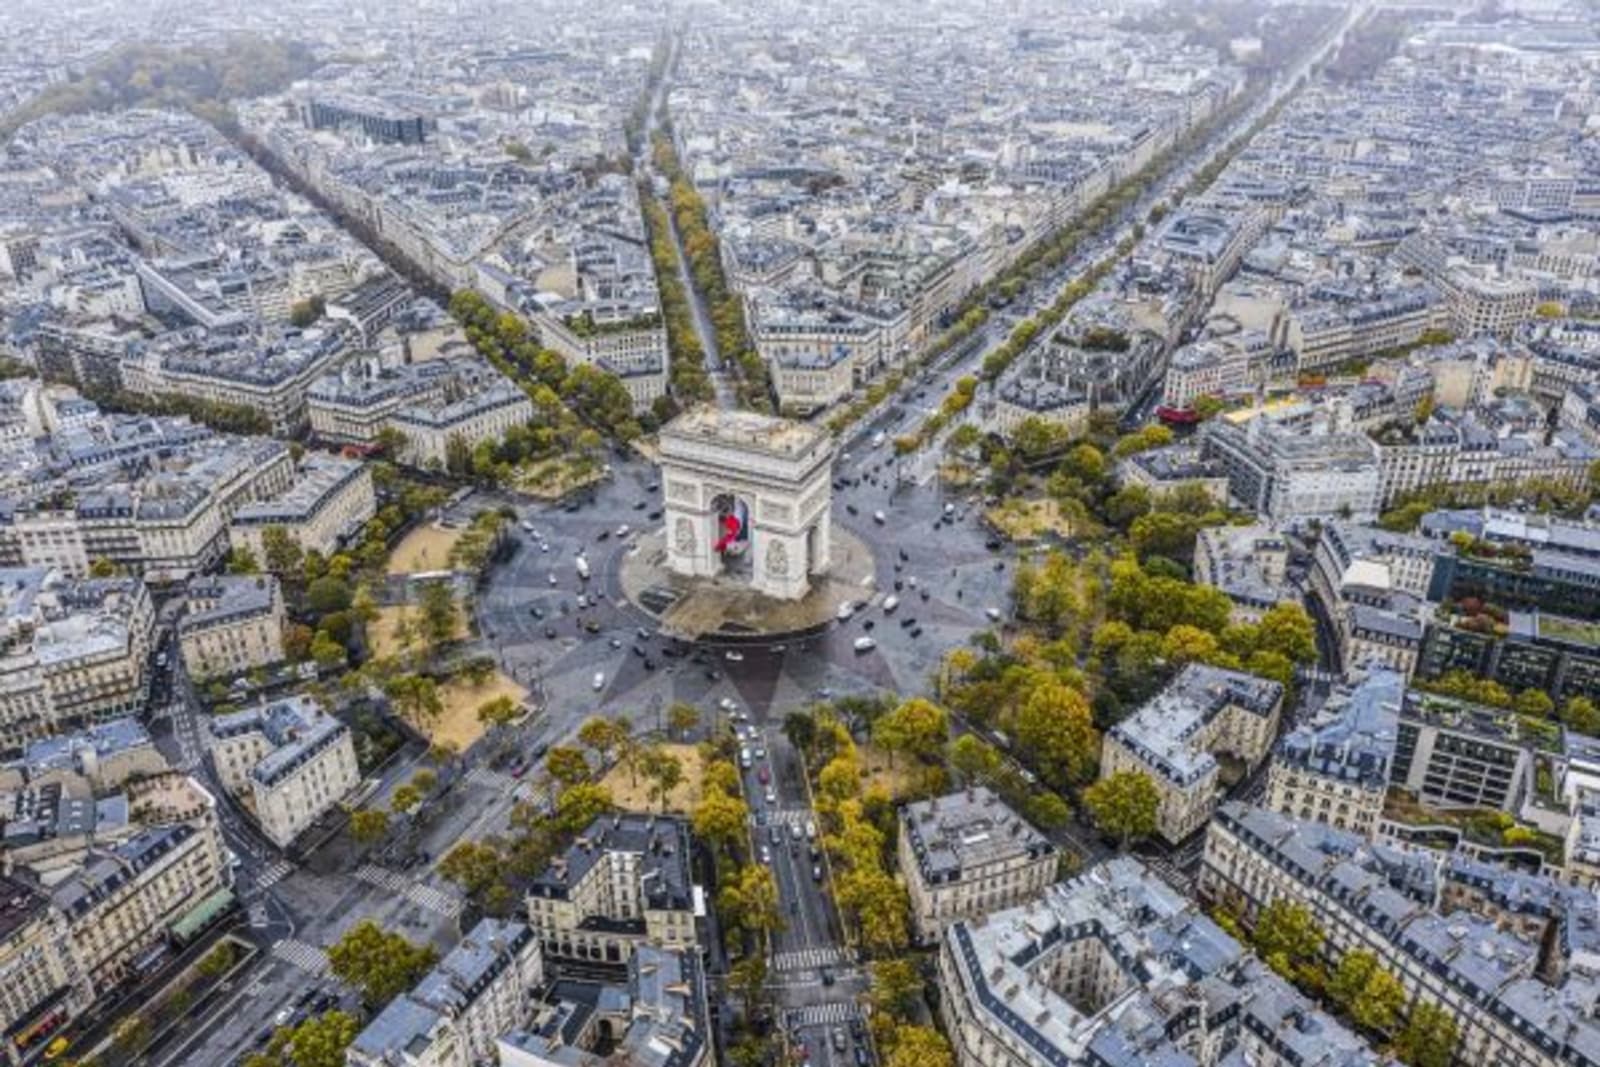 Aerial view of the Arc de triomphe and surrounding buildings and greenery